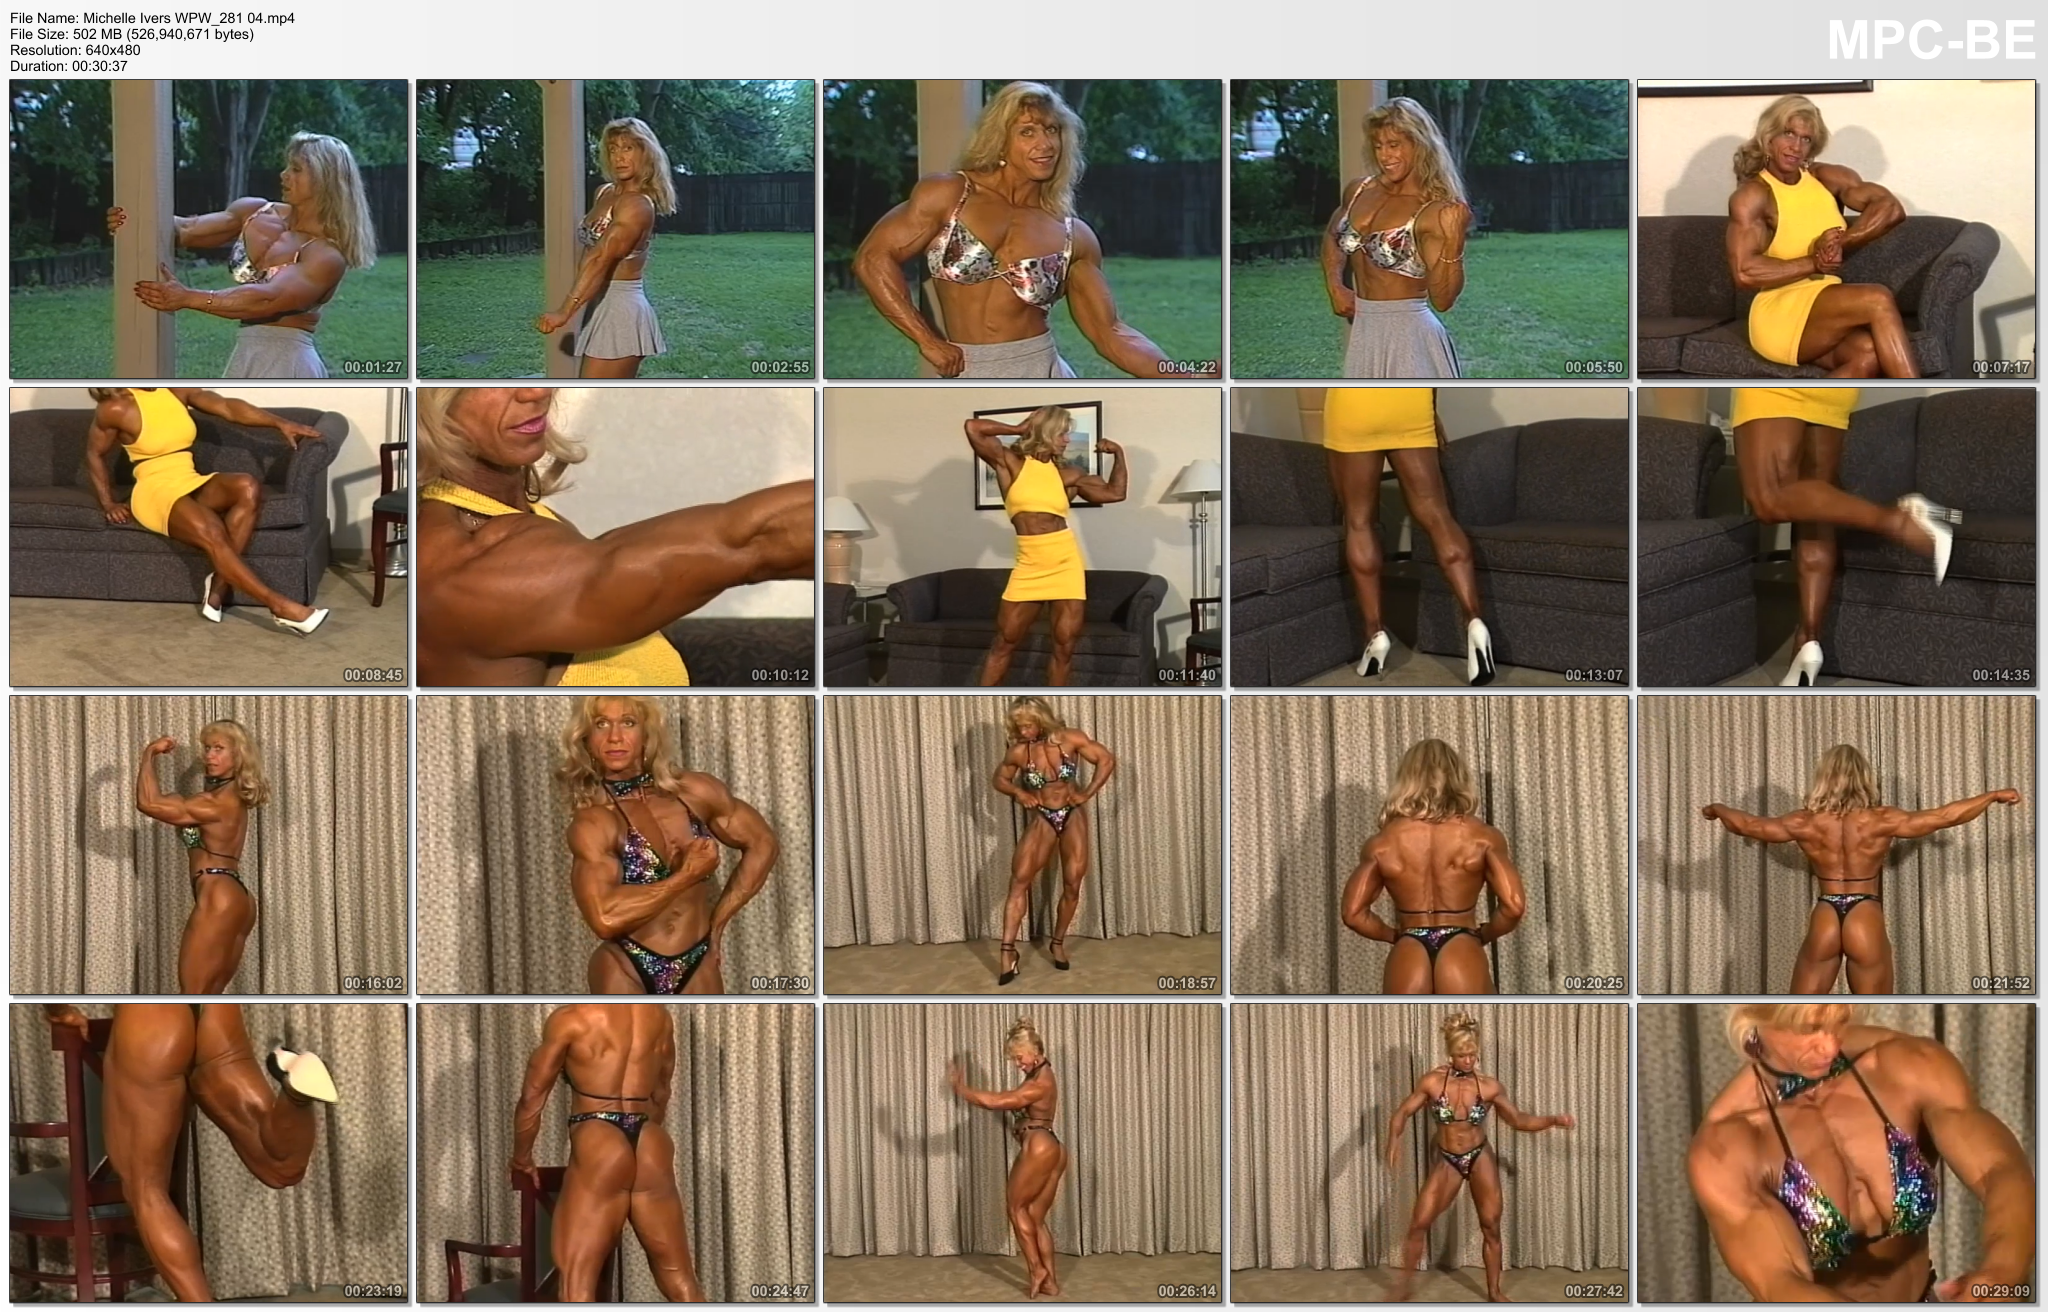 Michelle Ivers WPW_281 04.mp4_thumbs.png